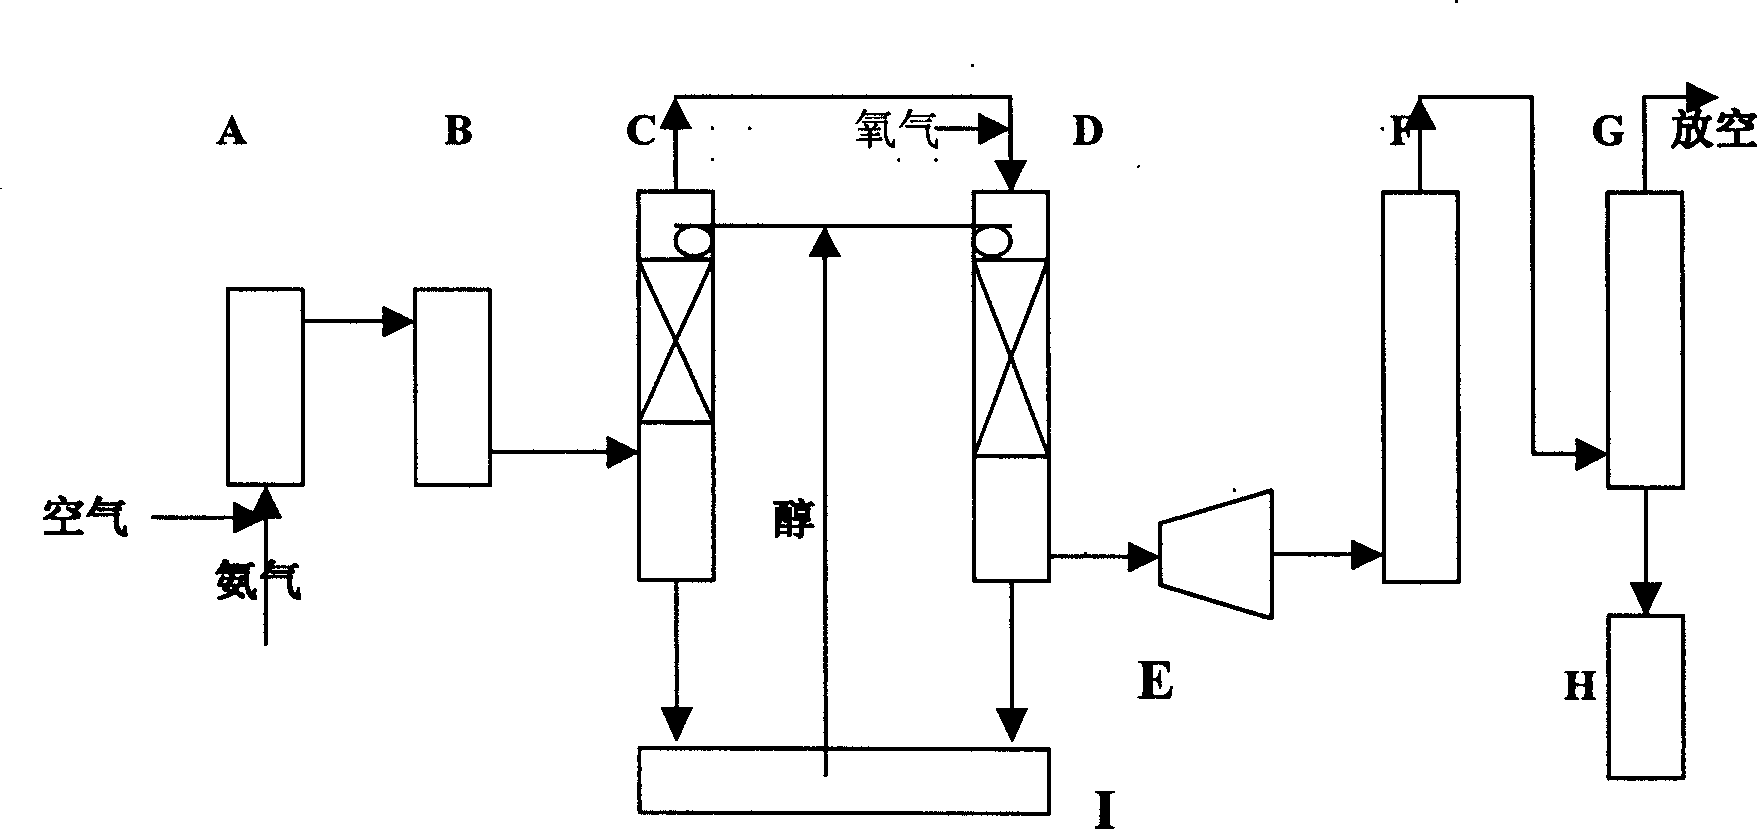 Production process of No gas for synthesizing oxalate